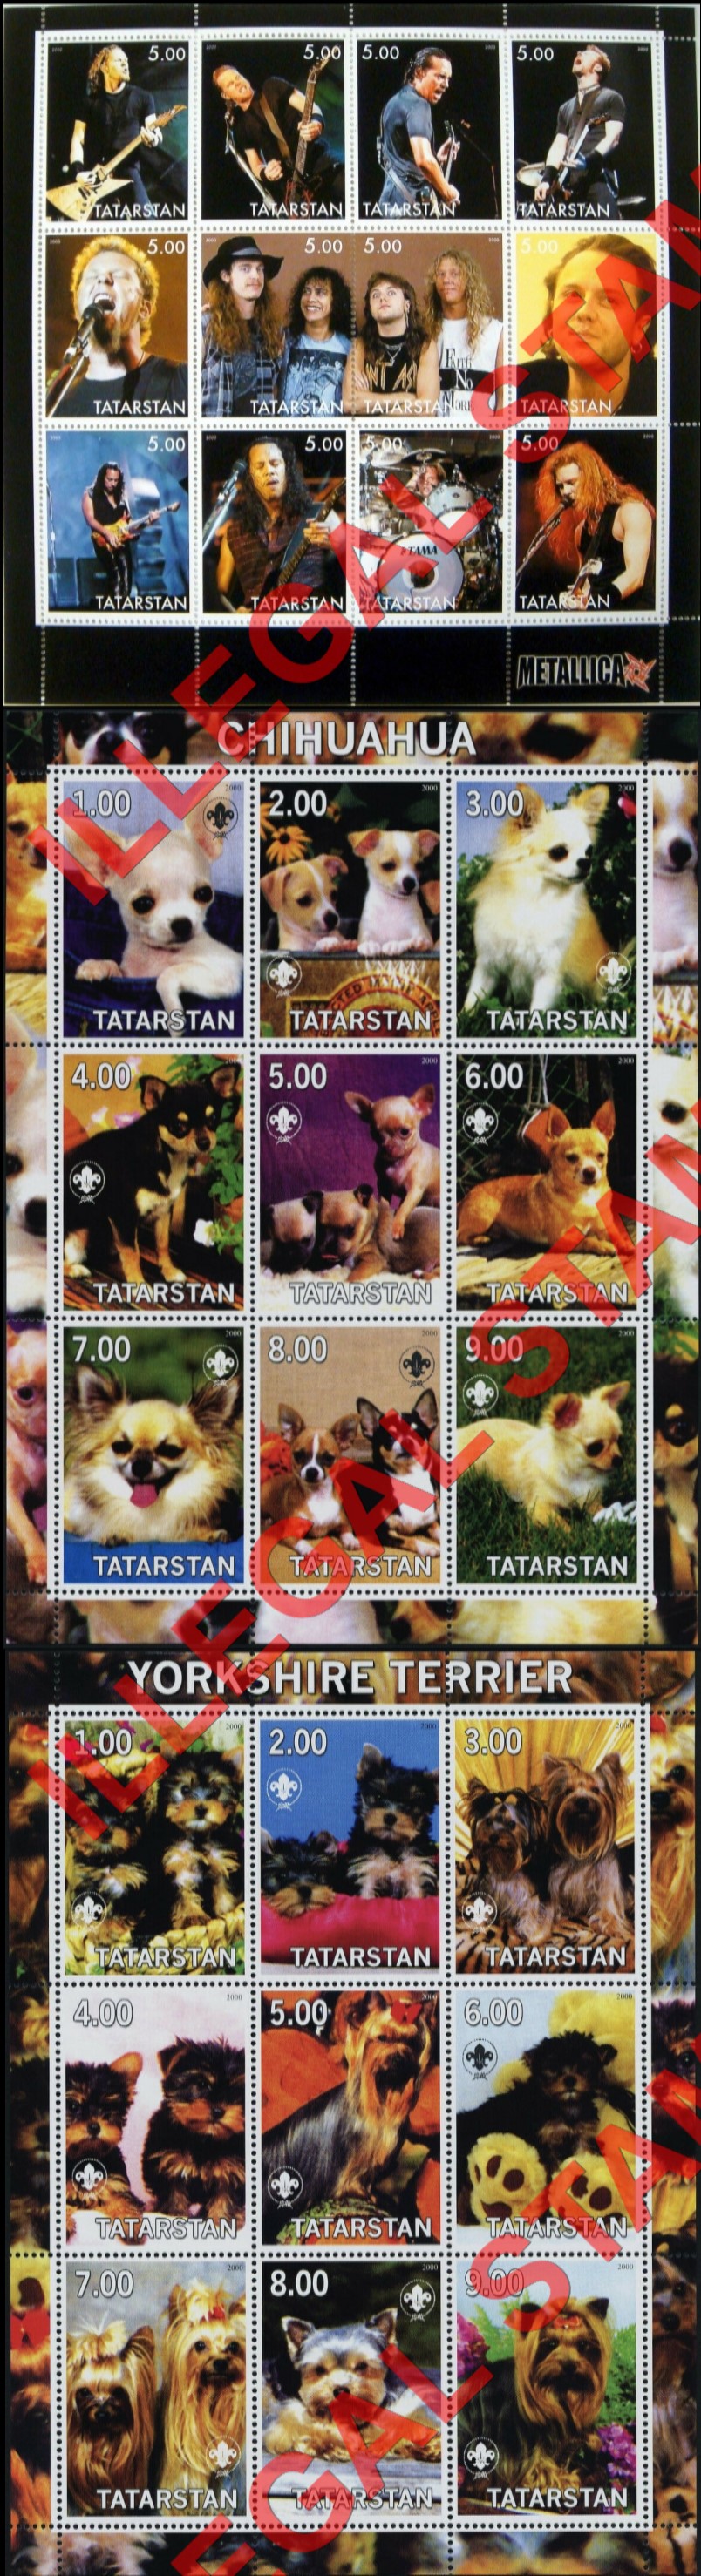 Republic of Tatarstan 2000 Counterfeit Illegal Stamps (Part 1)